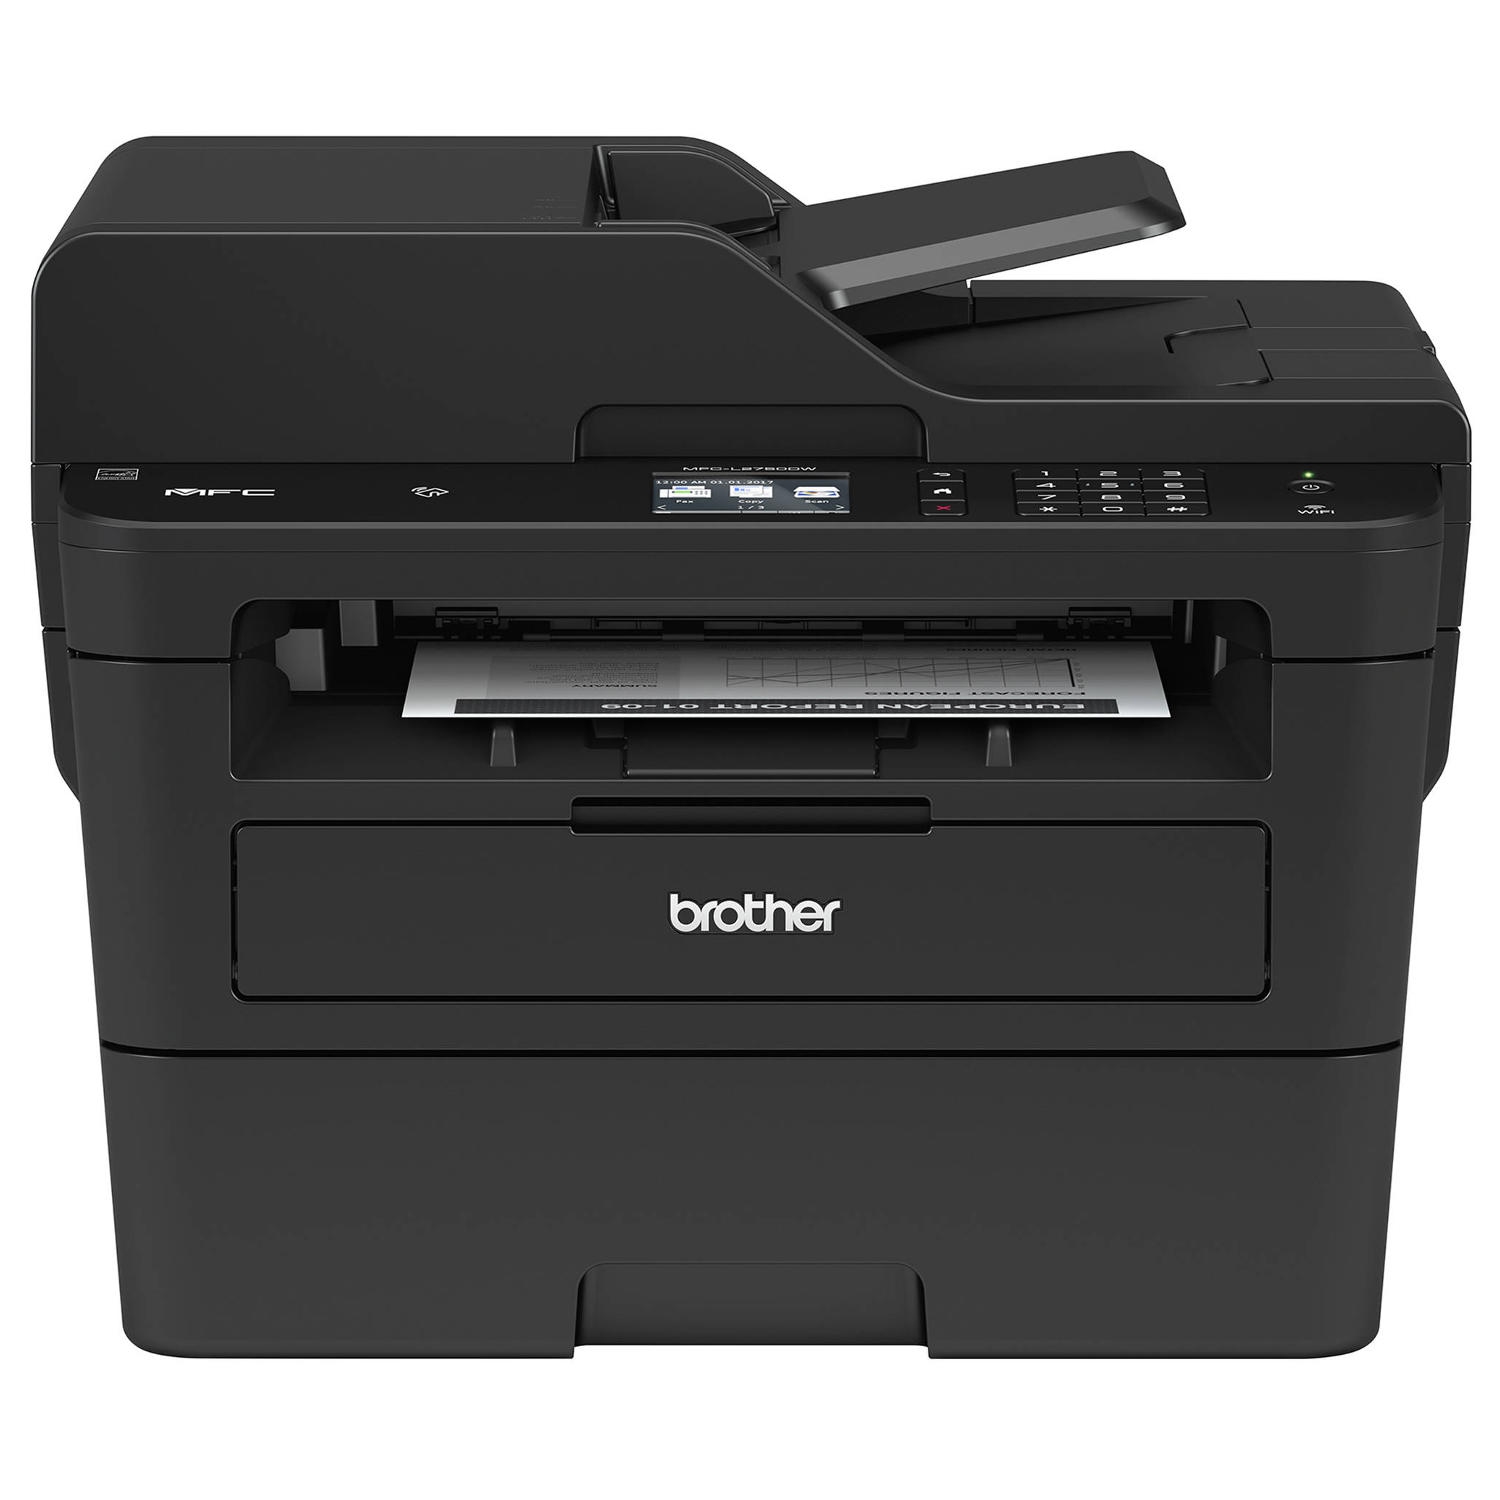 For Brother MFC-L2750DW All-in-One Monochrome Black and White Laser Printer with Printing Copying and Scanning and Fax